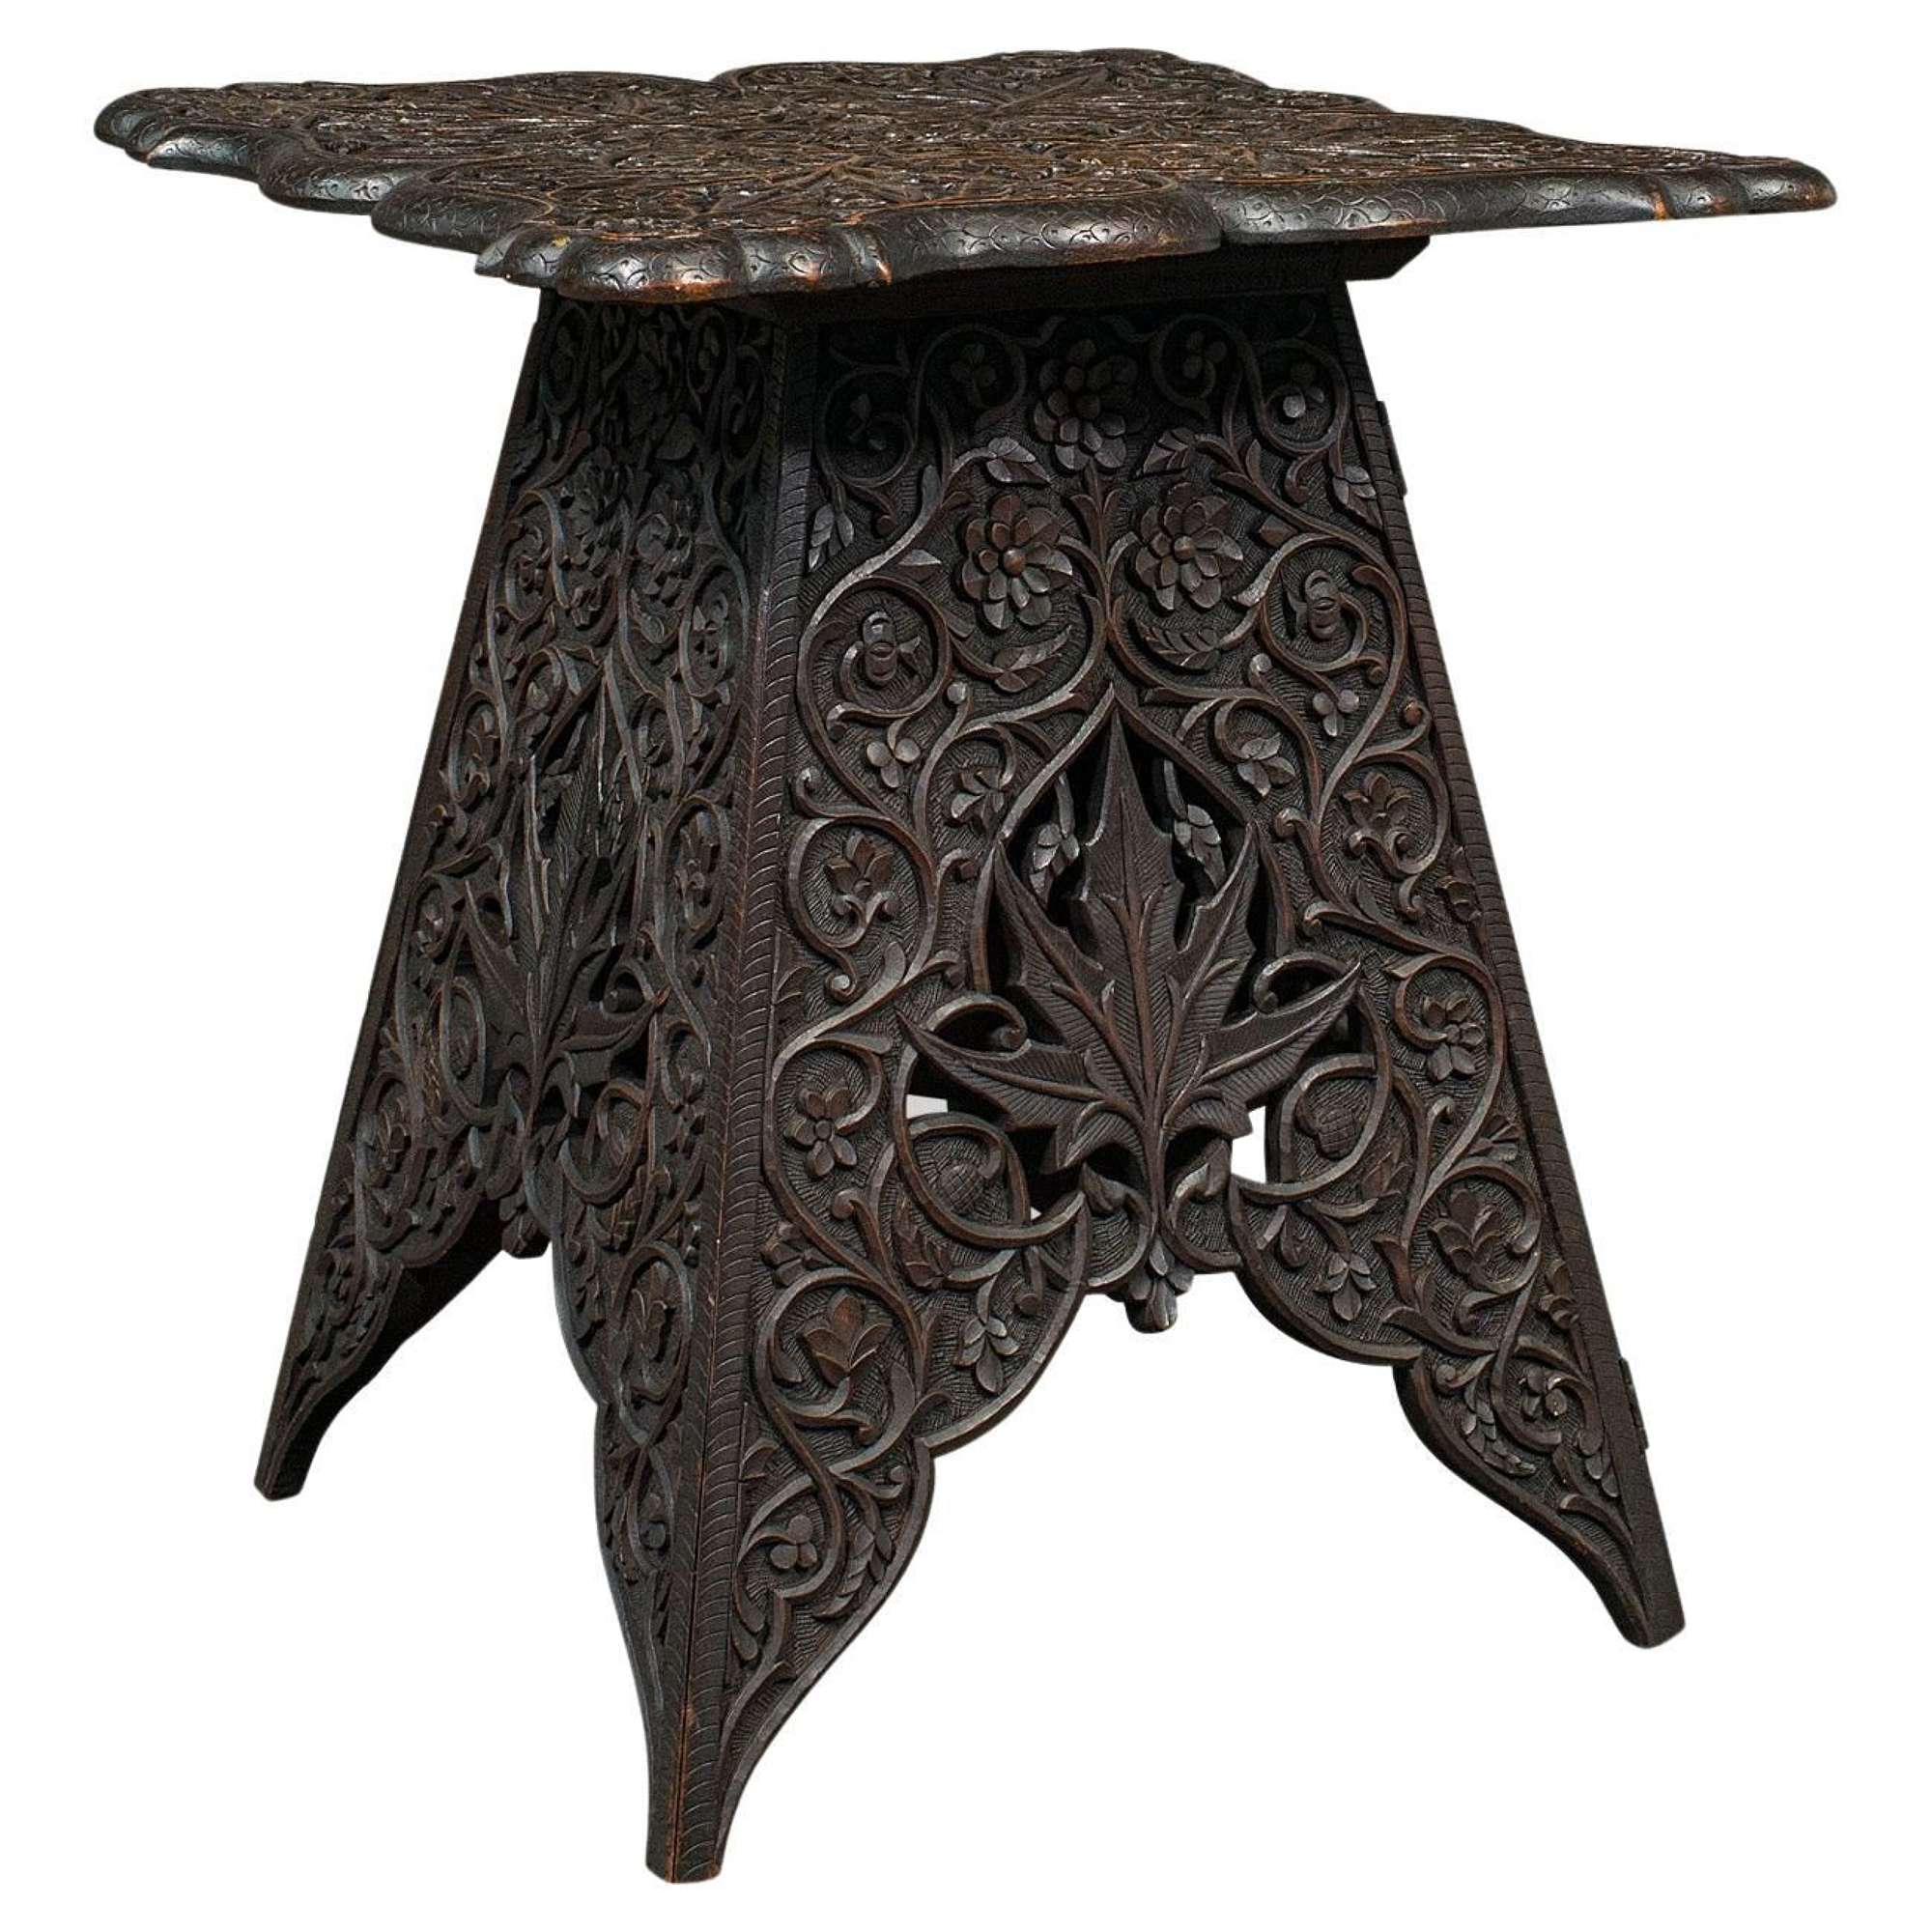 Antique Tea Table, Middle Eastern, Side, Wine, Lamp Stand, Victorian, Circa 1900